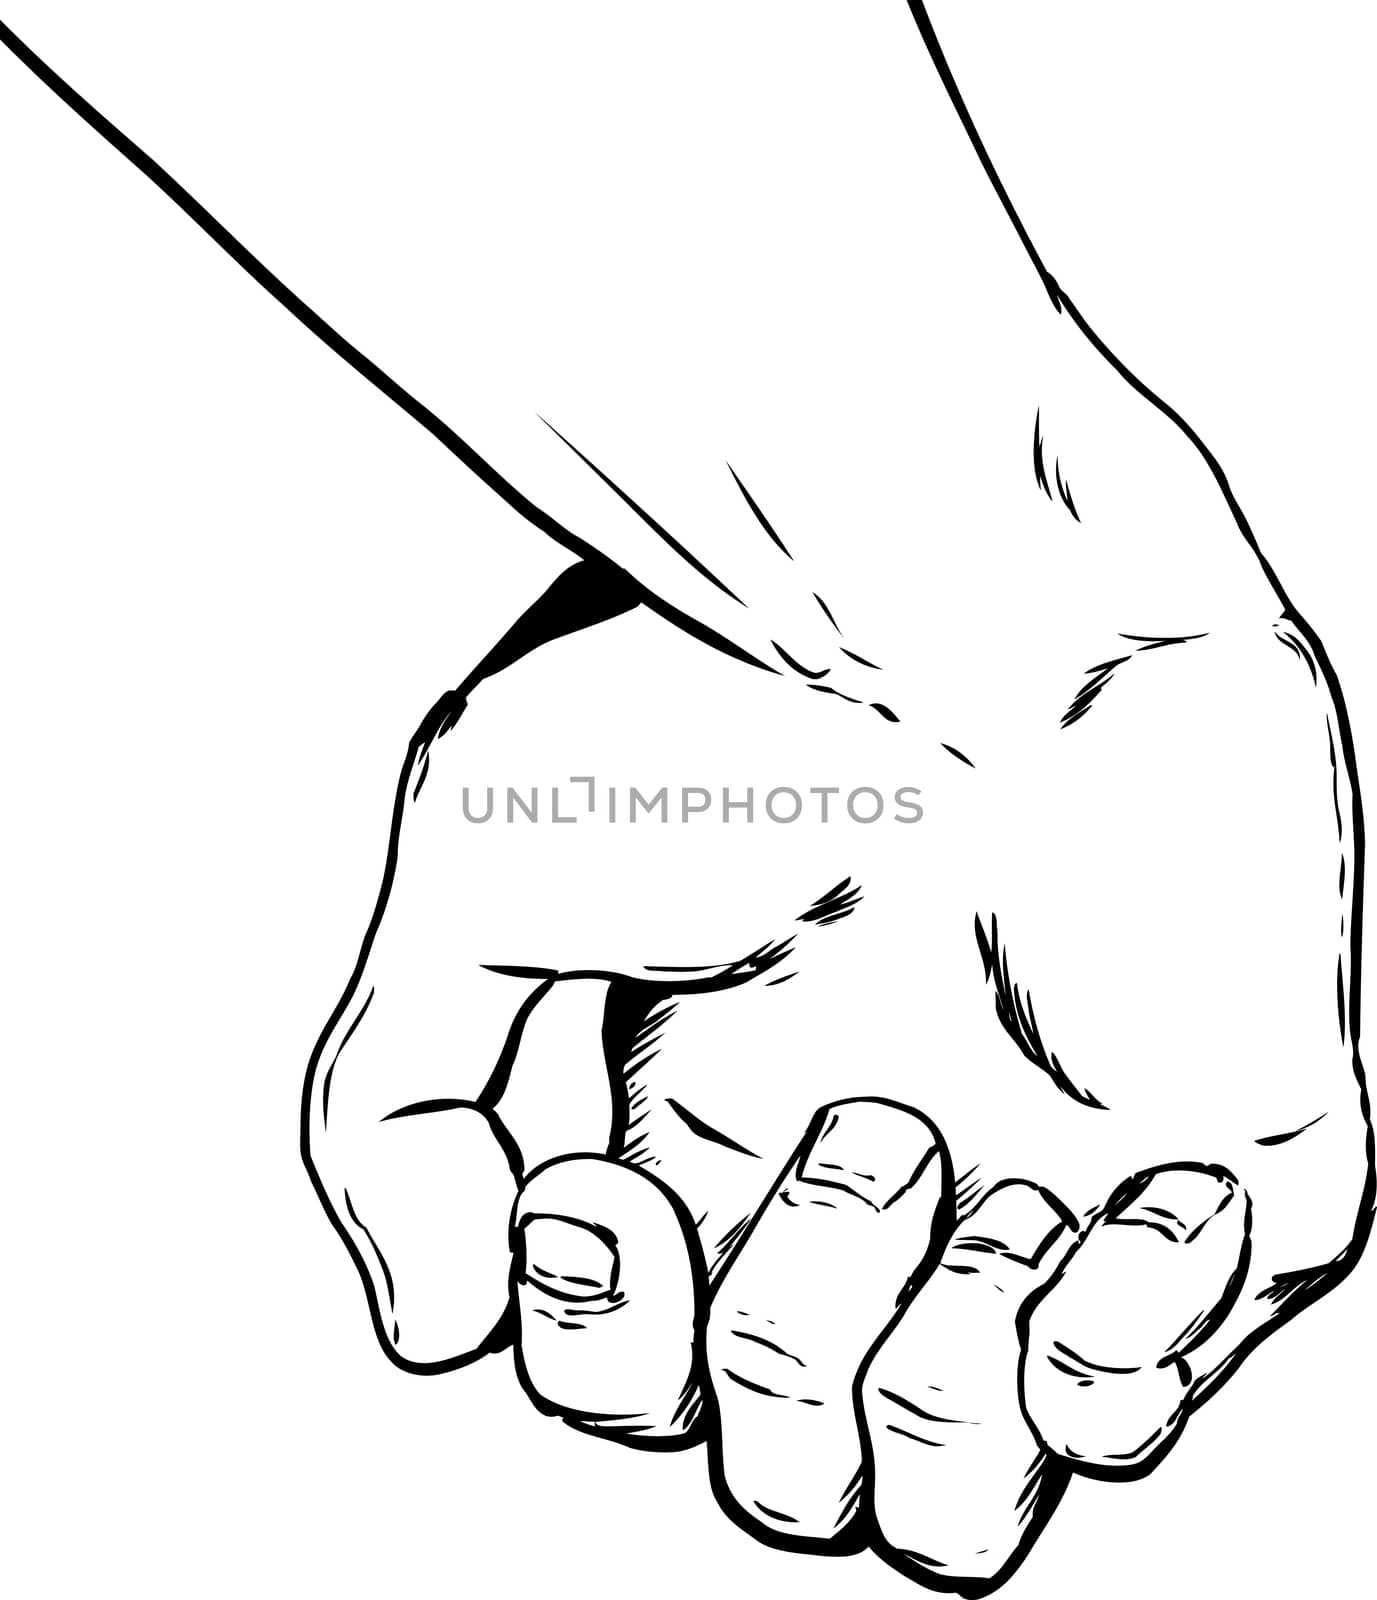 Outlined partially clenched human hand by TheBlackRhino